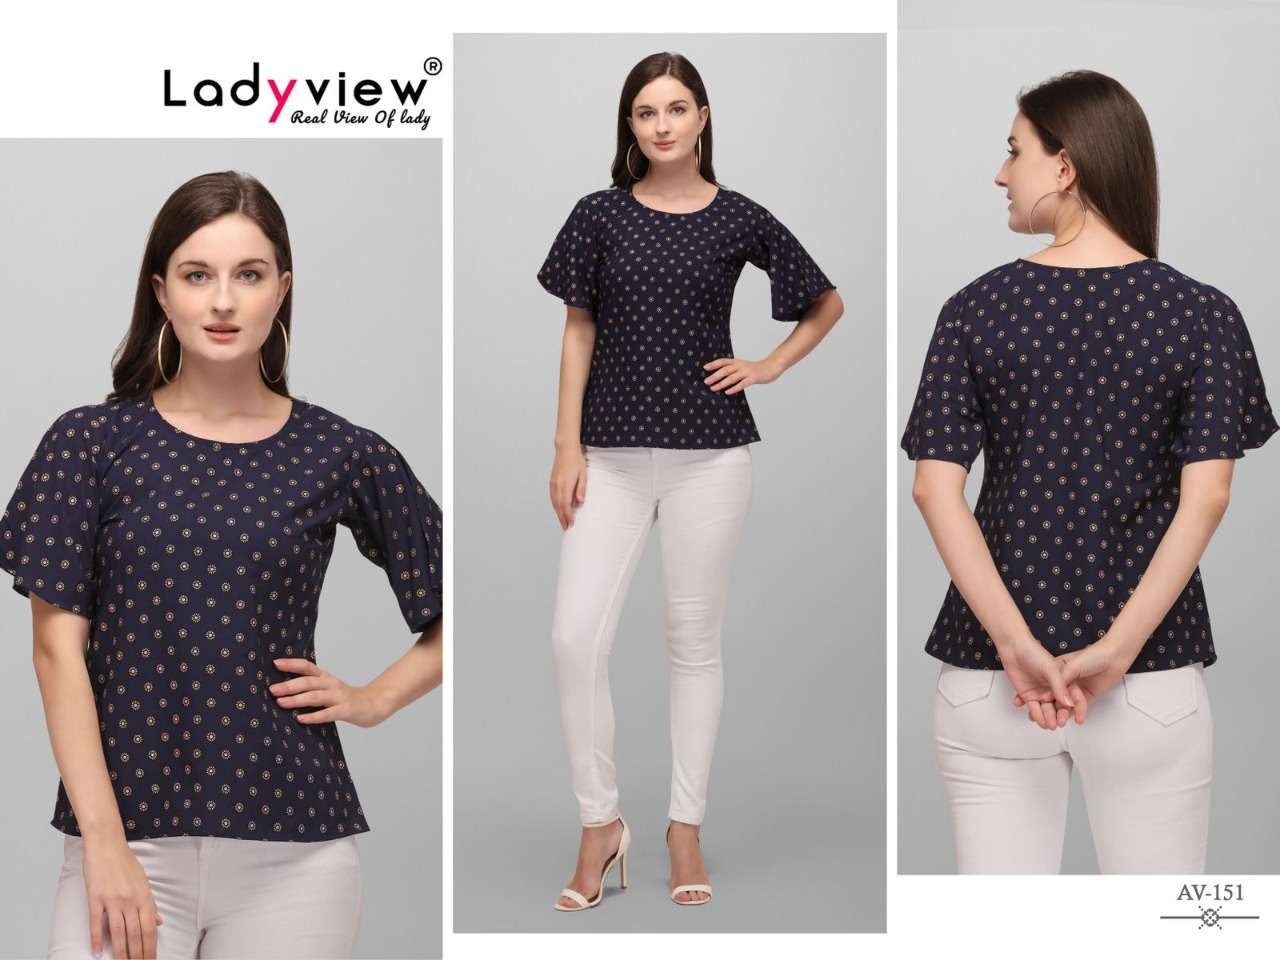 Ladyview Stylish Catalog Gold Foil Printed Western Tops